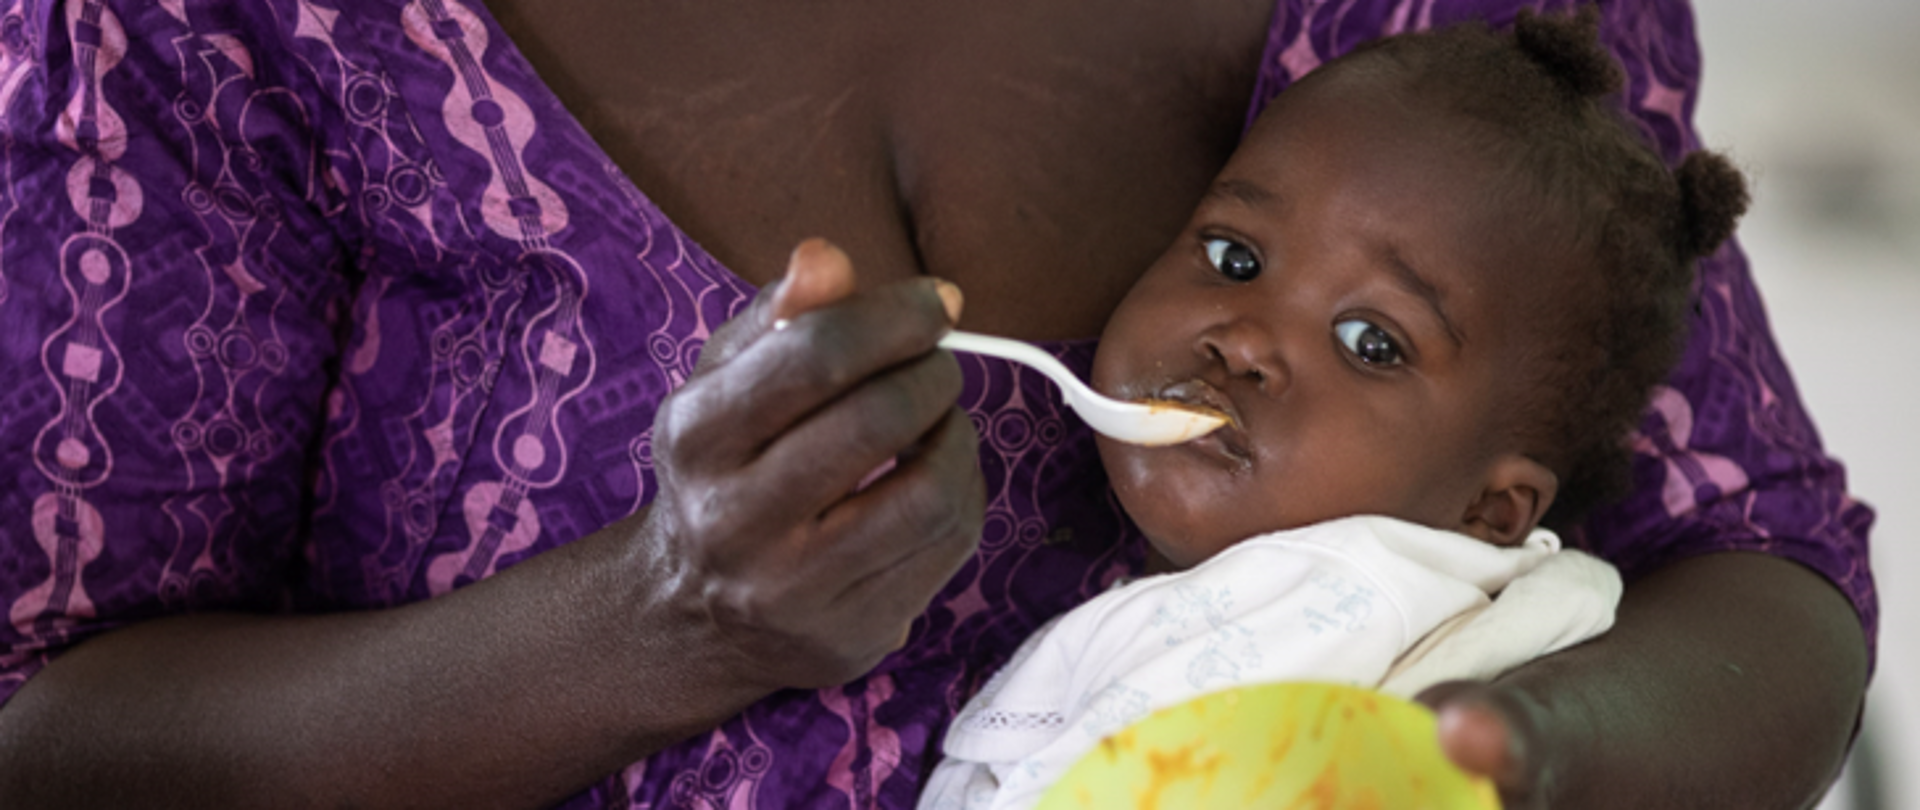 "Healthy and local" - combating and preventing malnutrition in children under 5, pregnant and lactating women, Senegal.